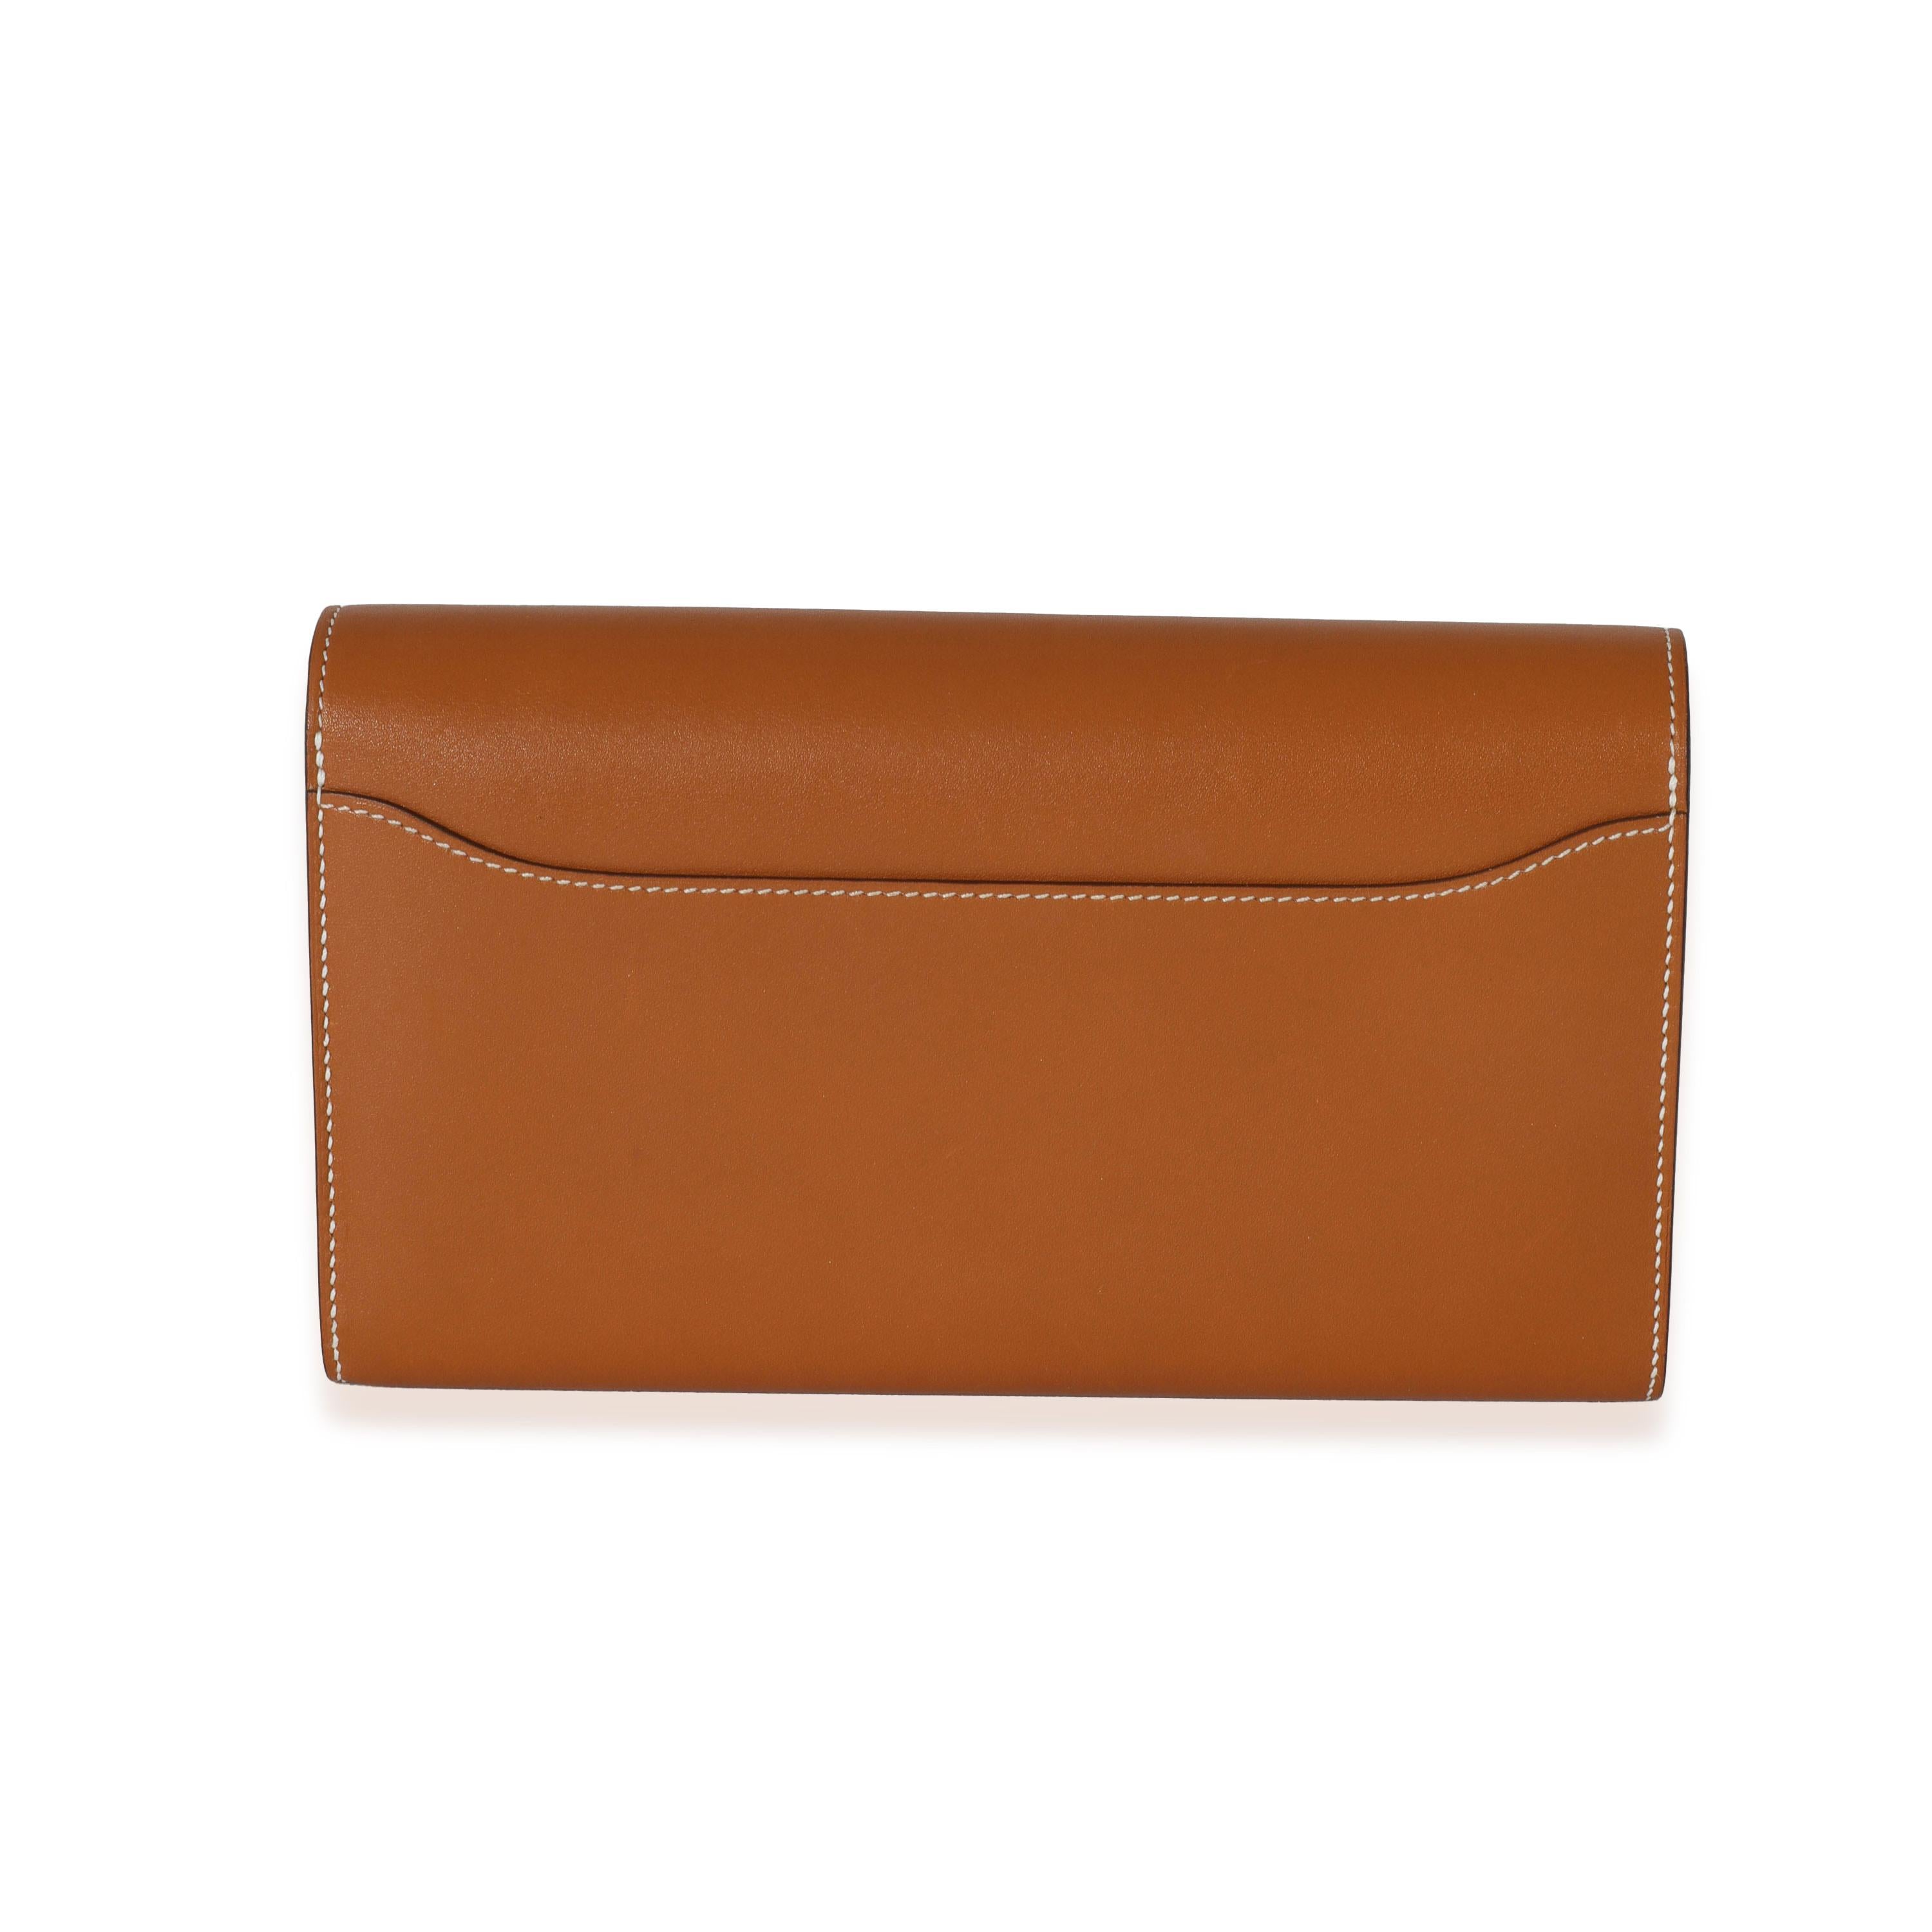 Listing Title: Hermès Fauve Barenia Constance Long Wallet PHW
SKU: 132161
Condition: Pre-owned 
Handbag Condition: Very Good
Condition Comments: Item is in very good condition with minor signs of wear. Scuffing throughout exterior and interior